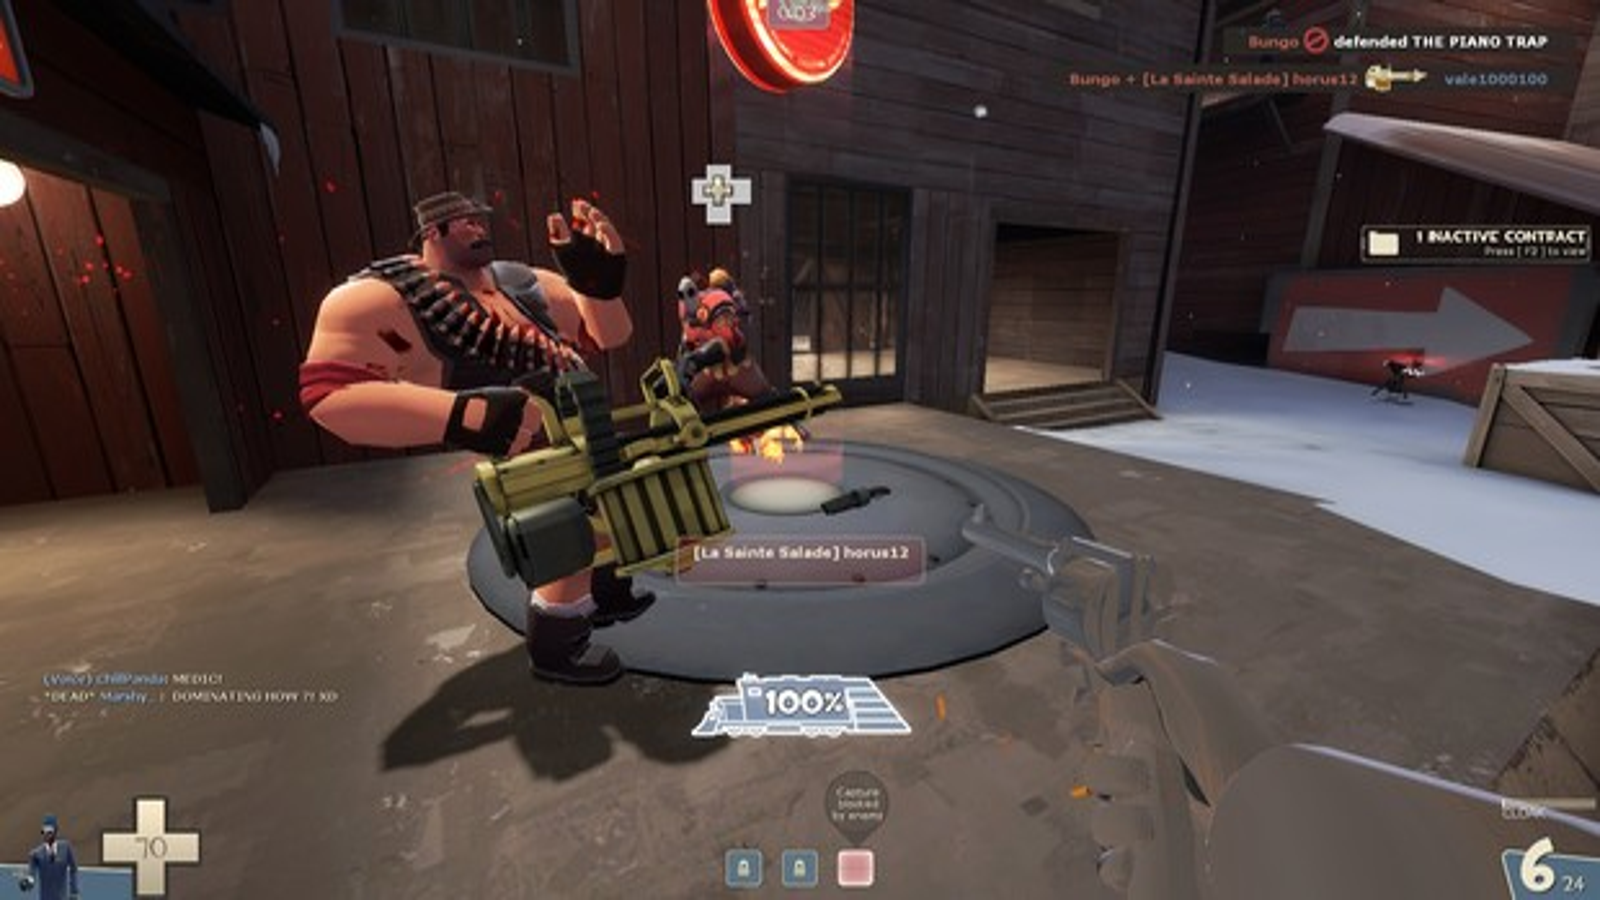 Team Fortress 2 came out 12 years ago this month and is still in